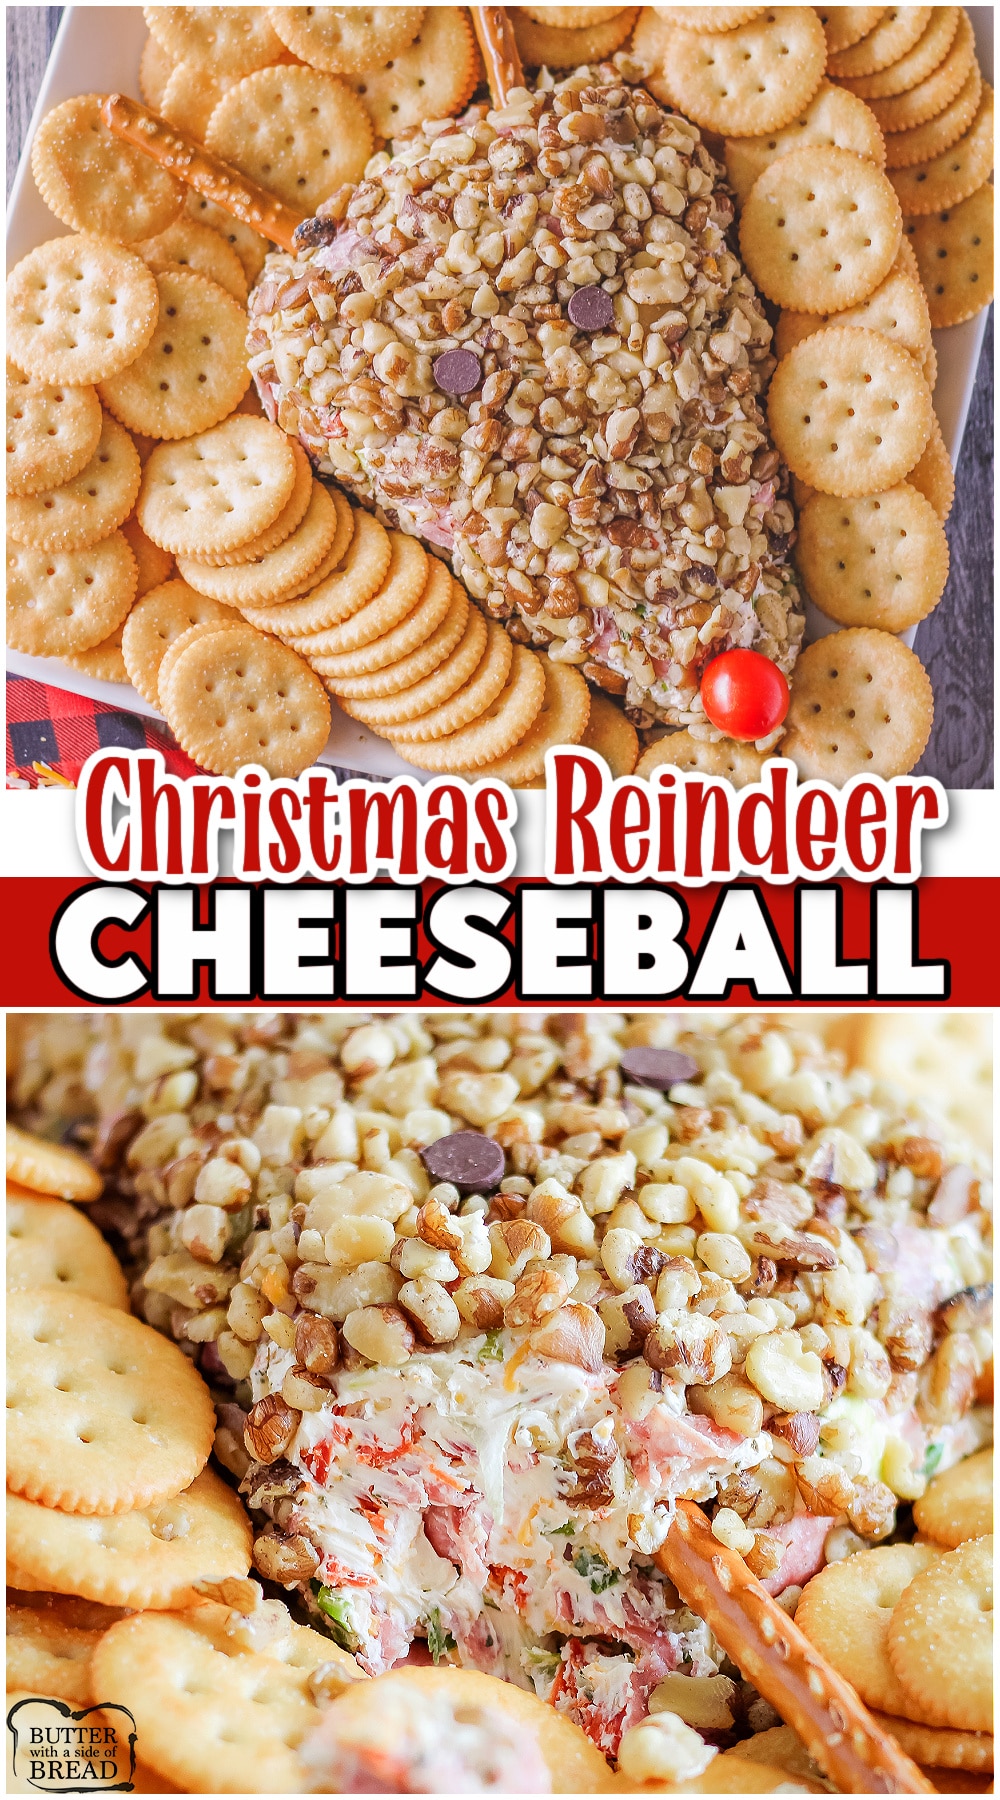 Reindeer Christmas cheeseball is a flavorful appetizer shaped to look like a cute reindeer! Fun & festive homemade cheeseball perfect for the holidays!